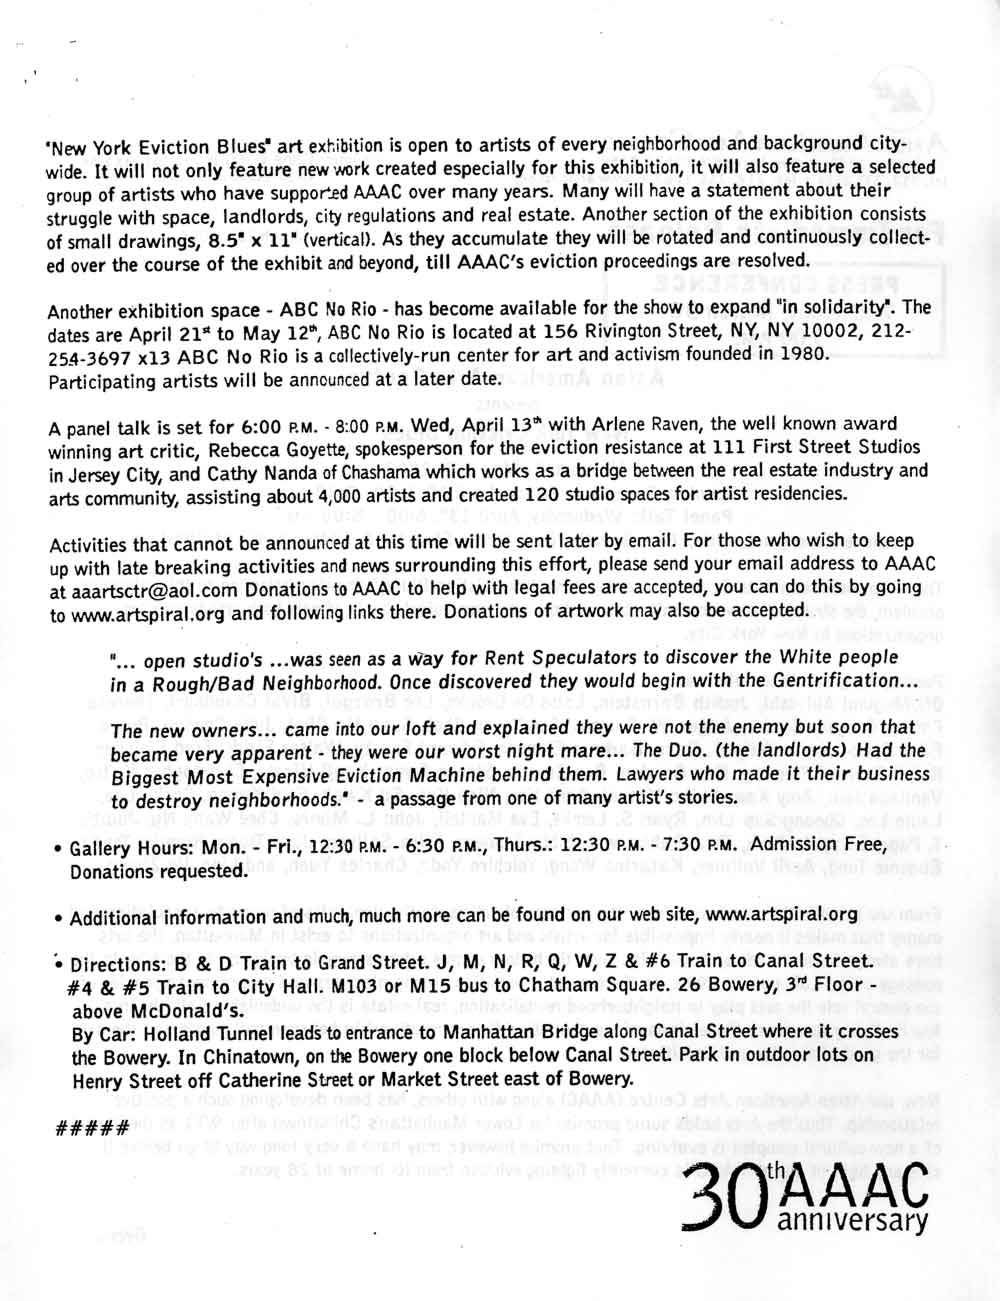 Eviction Blues press release, pg 2